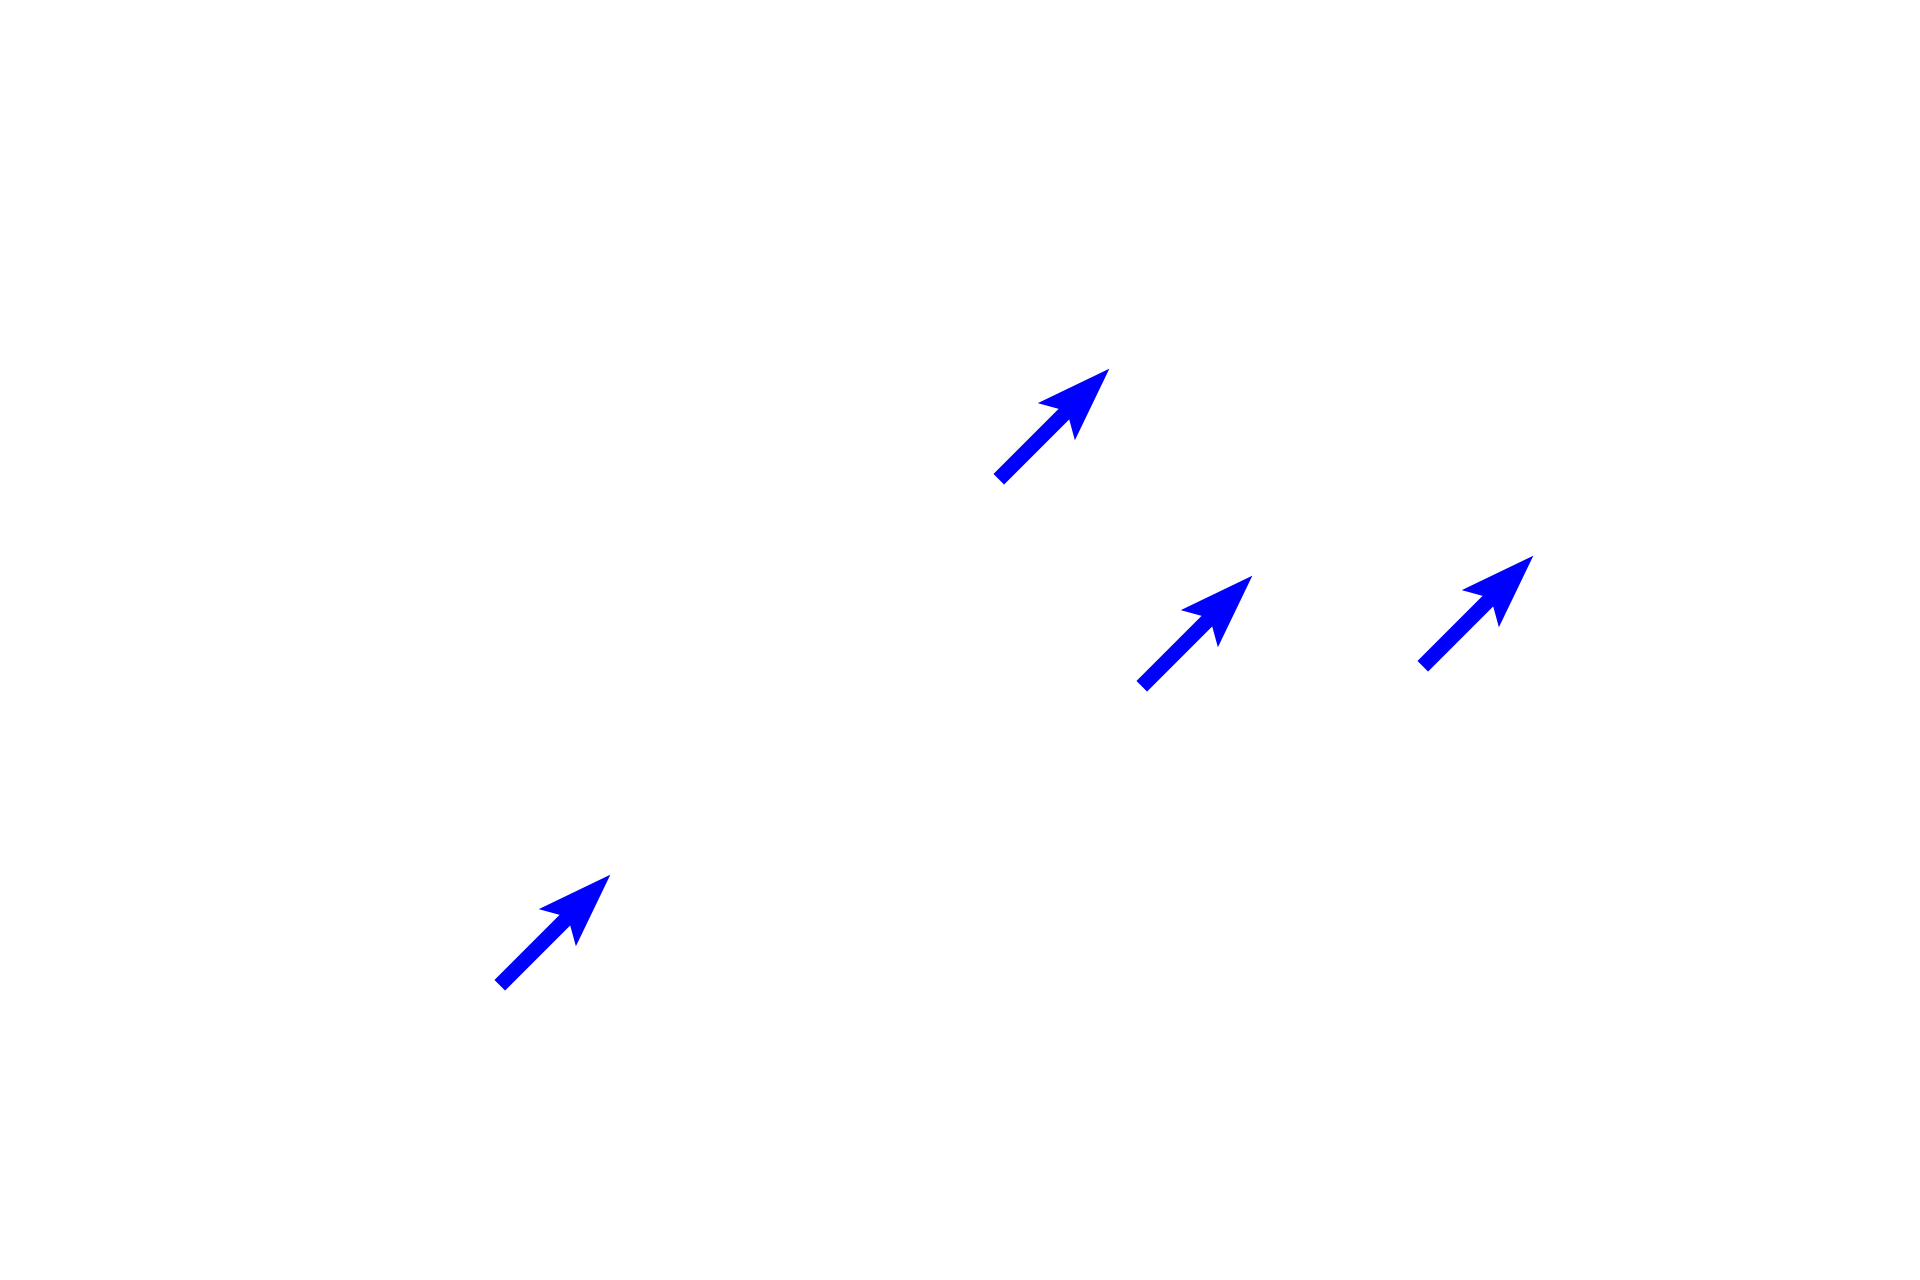 Herring bodies with hormone-containing granules <p>The main hormones released from the pars nervosa are oxytocin and vasopressin, actually synthesized by paraventricular and supraoptic neurons located in the hypothalamus.  Hormone-containing granules are transported down the axons of these neurons and accumulate in their expanded terminals called Herring bodies.  Pituicytes surround Herring bodies and assist hormone storage and release.  1000x</p>
